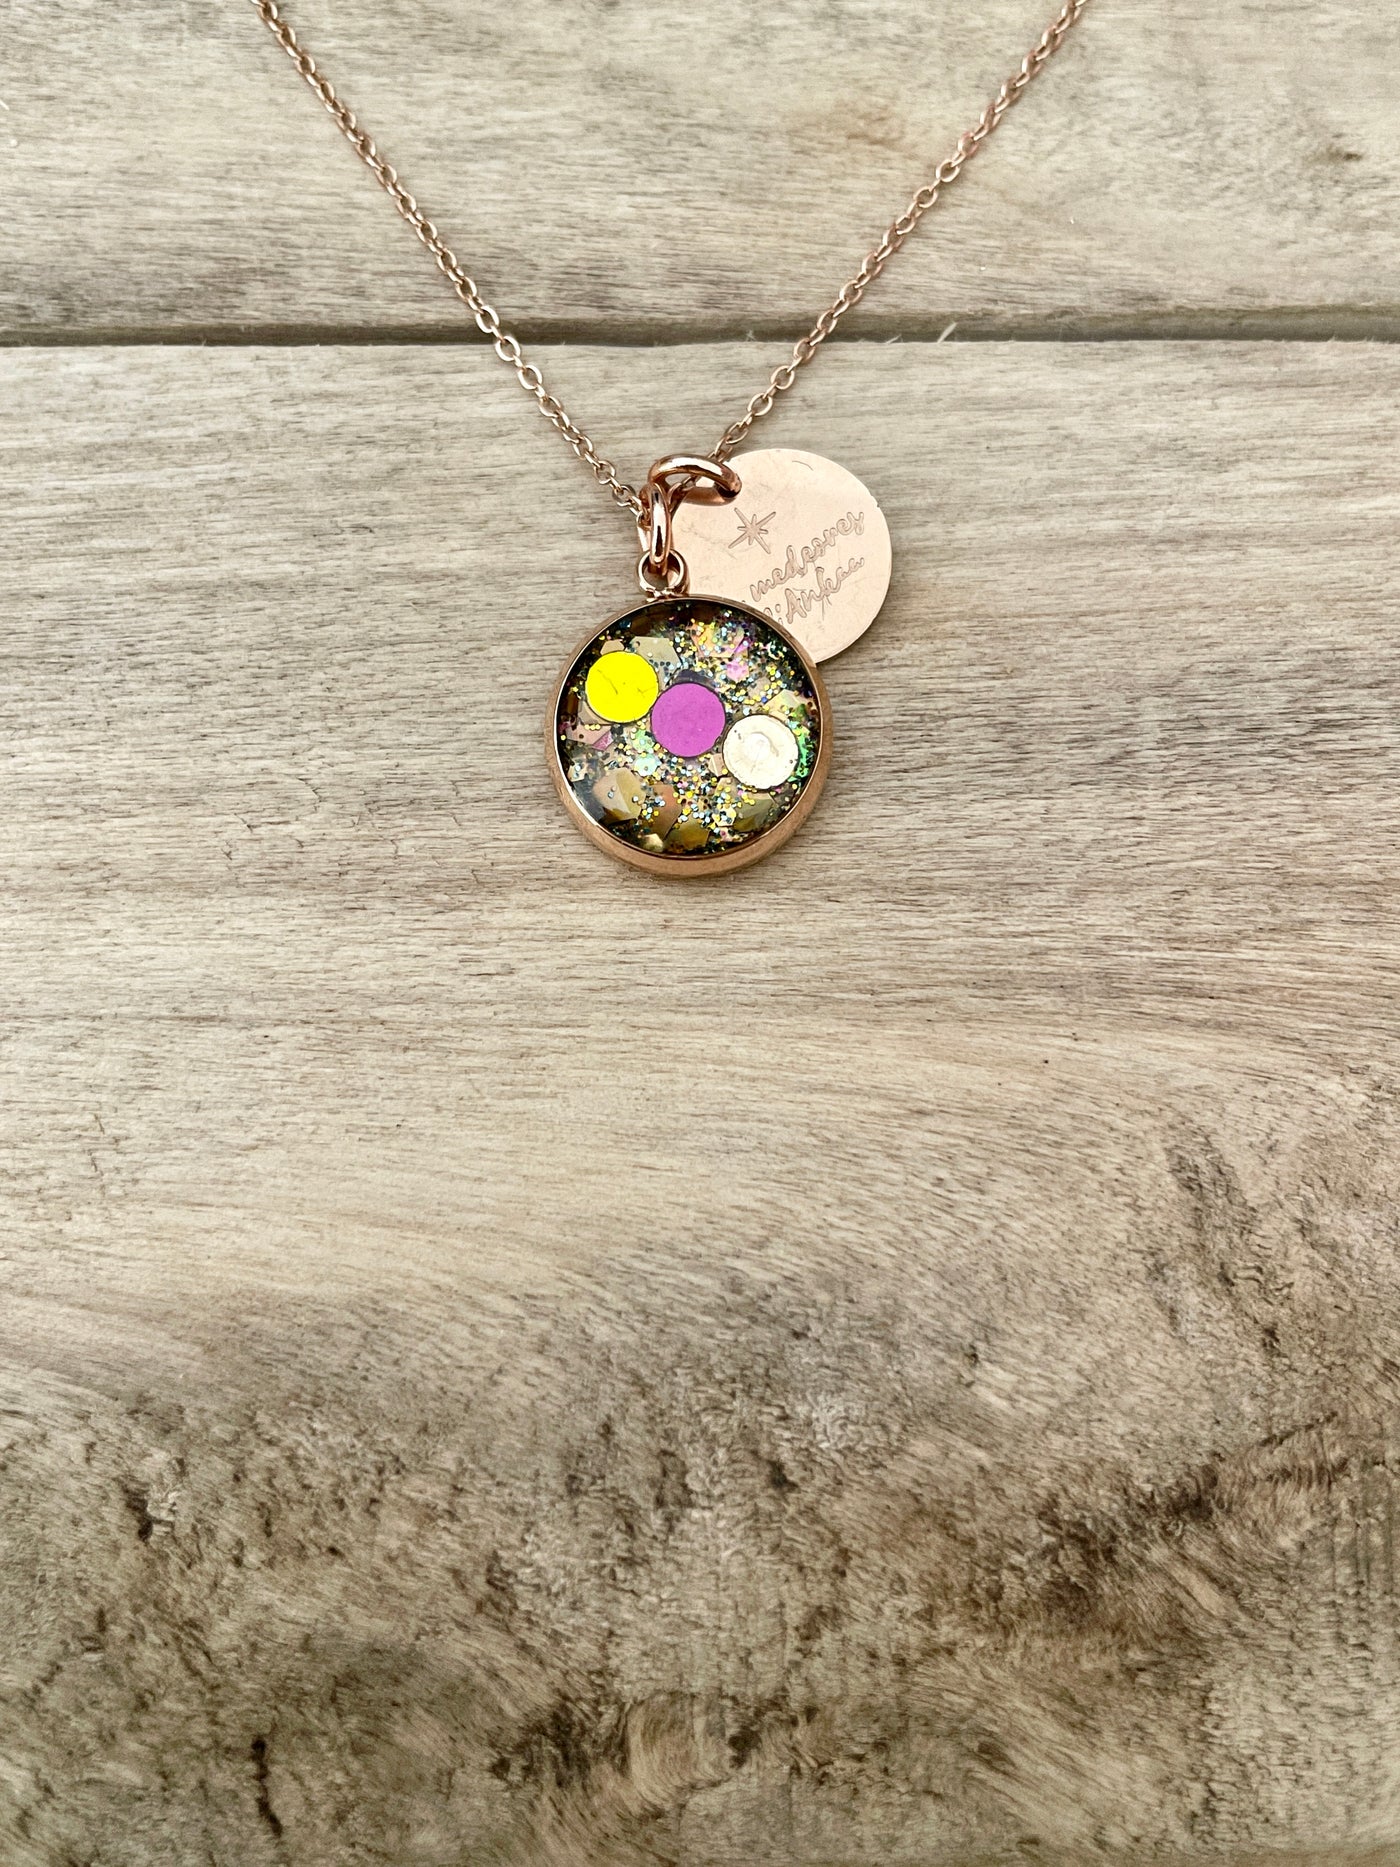 Reminiscence simple rose gold necklace